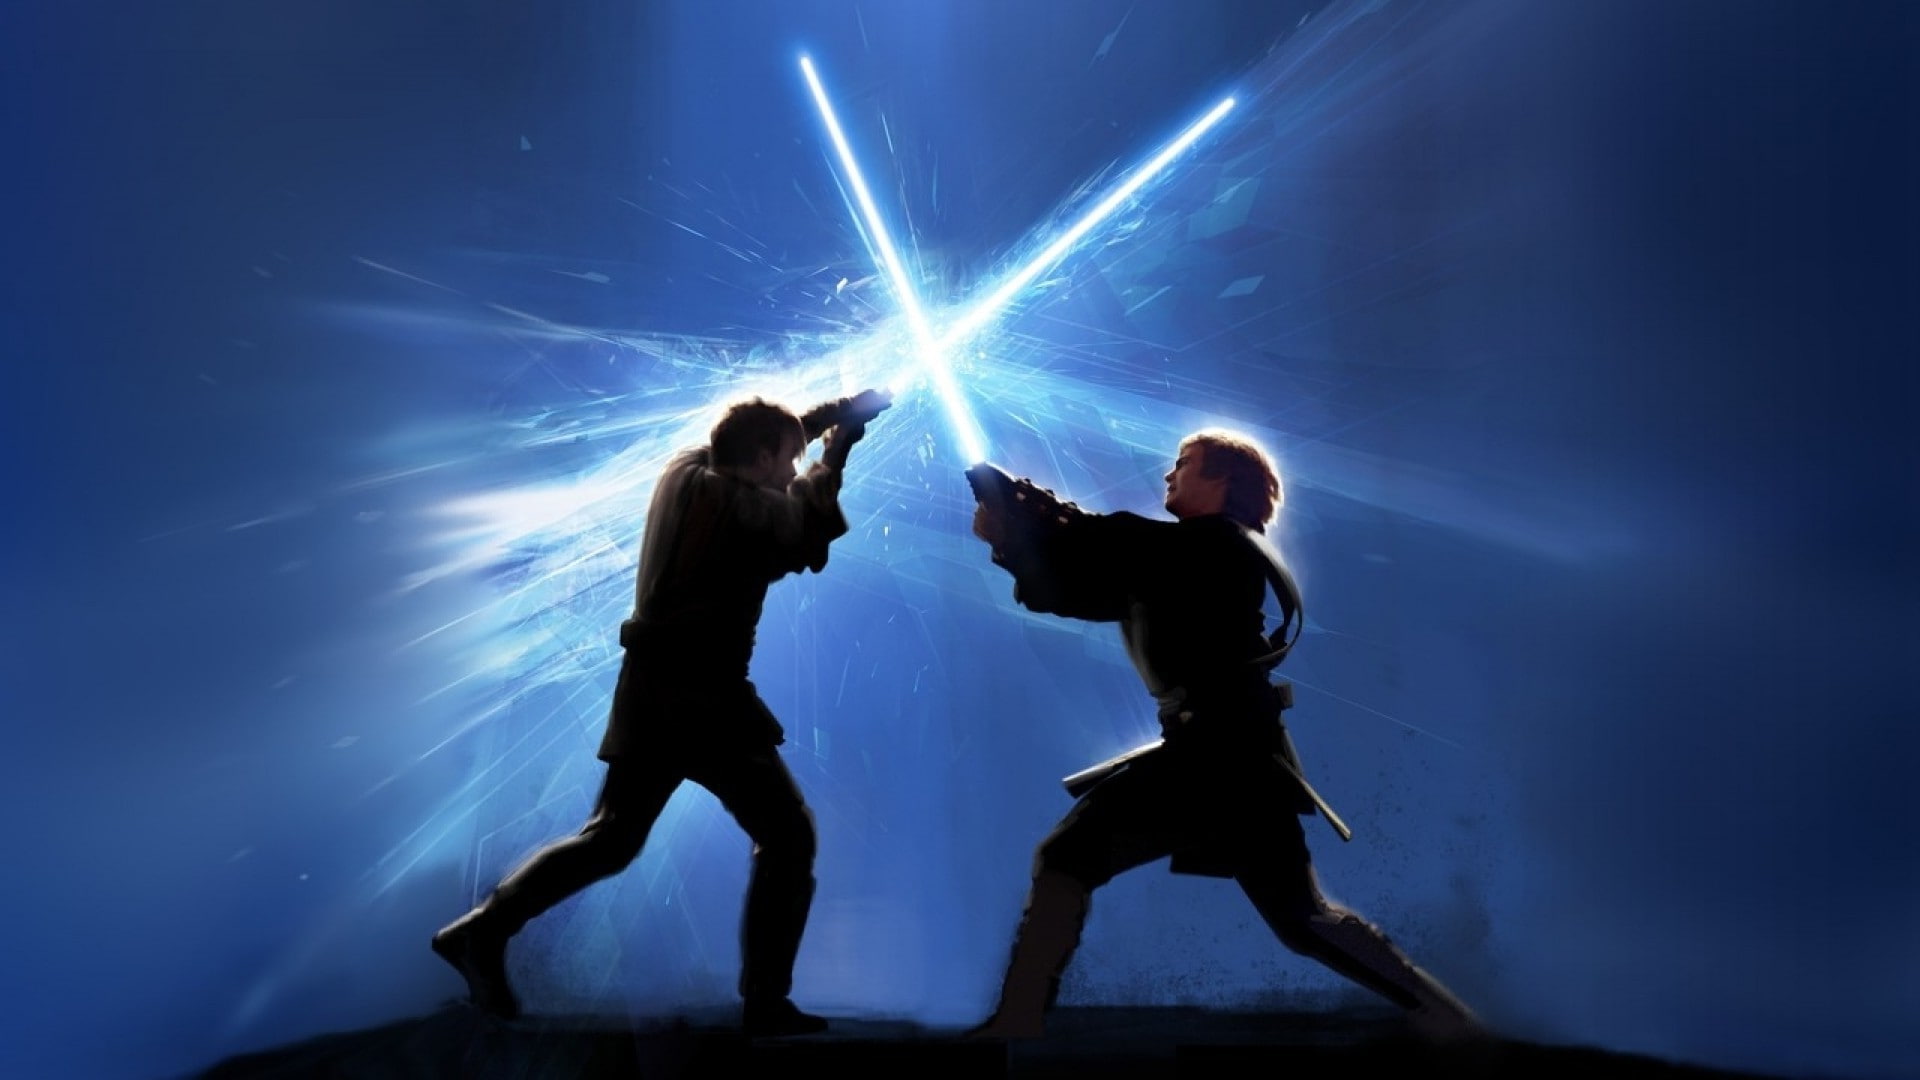 Star Wars, Star Wars: Episode III The Revenge Of The Sith, silhouette